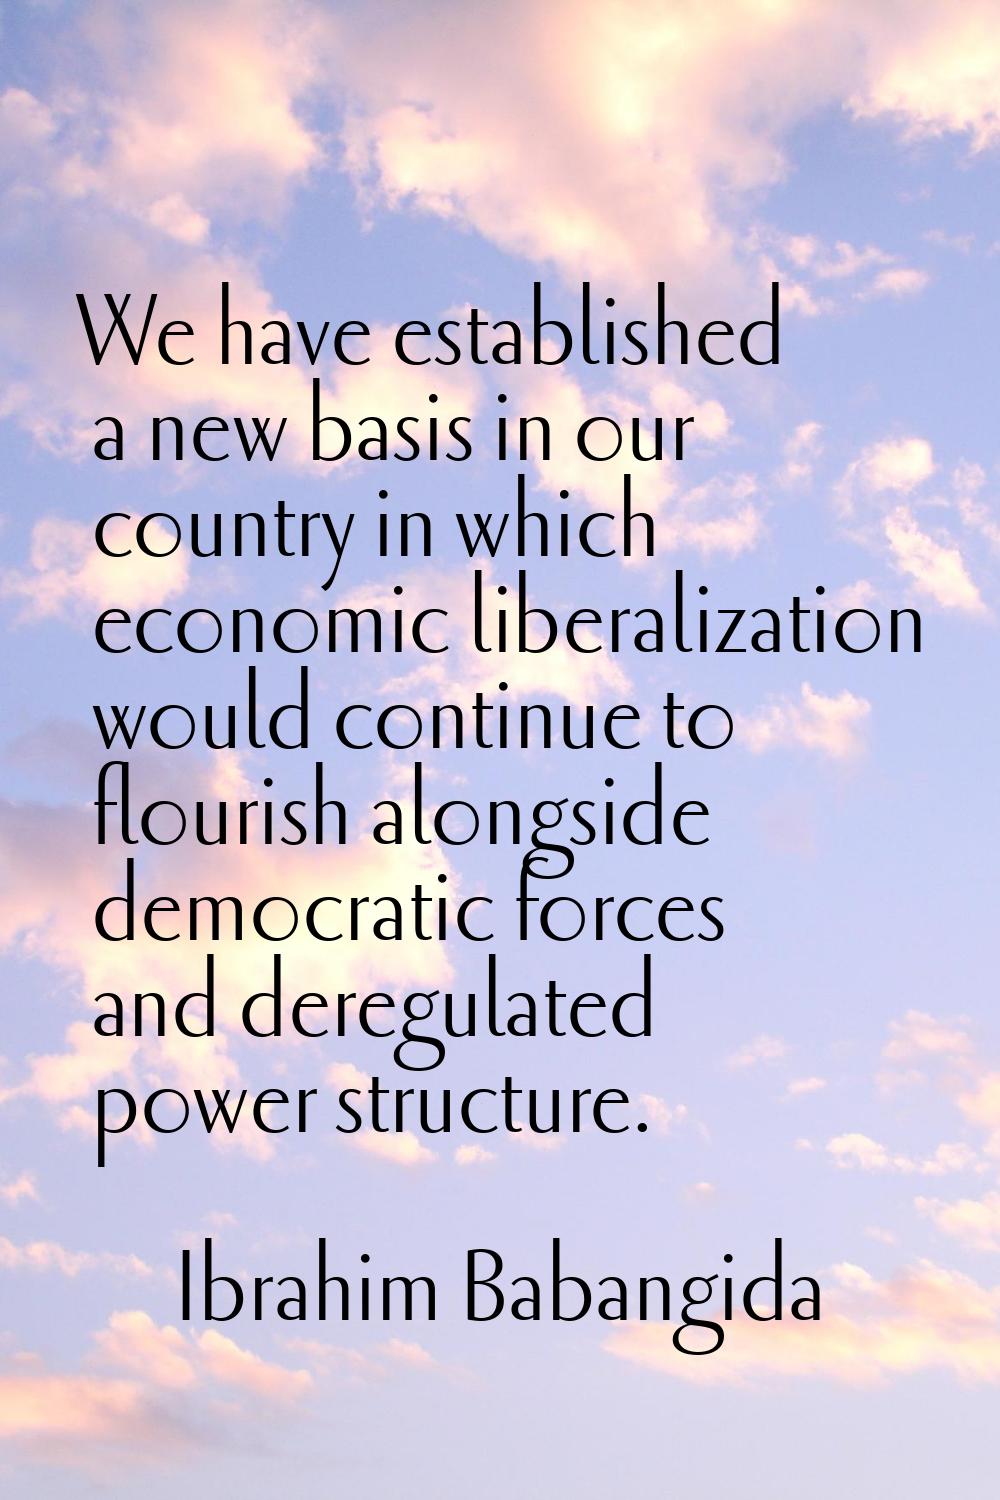 We have established a new basis in our country in which economic liberalization would continue to f